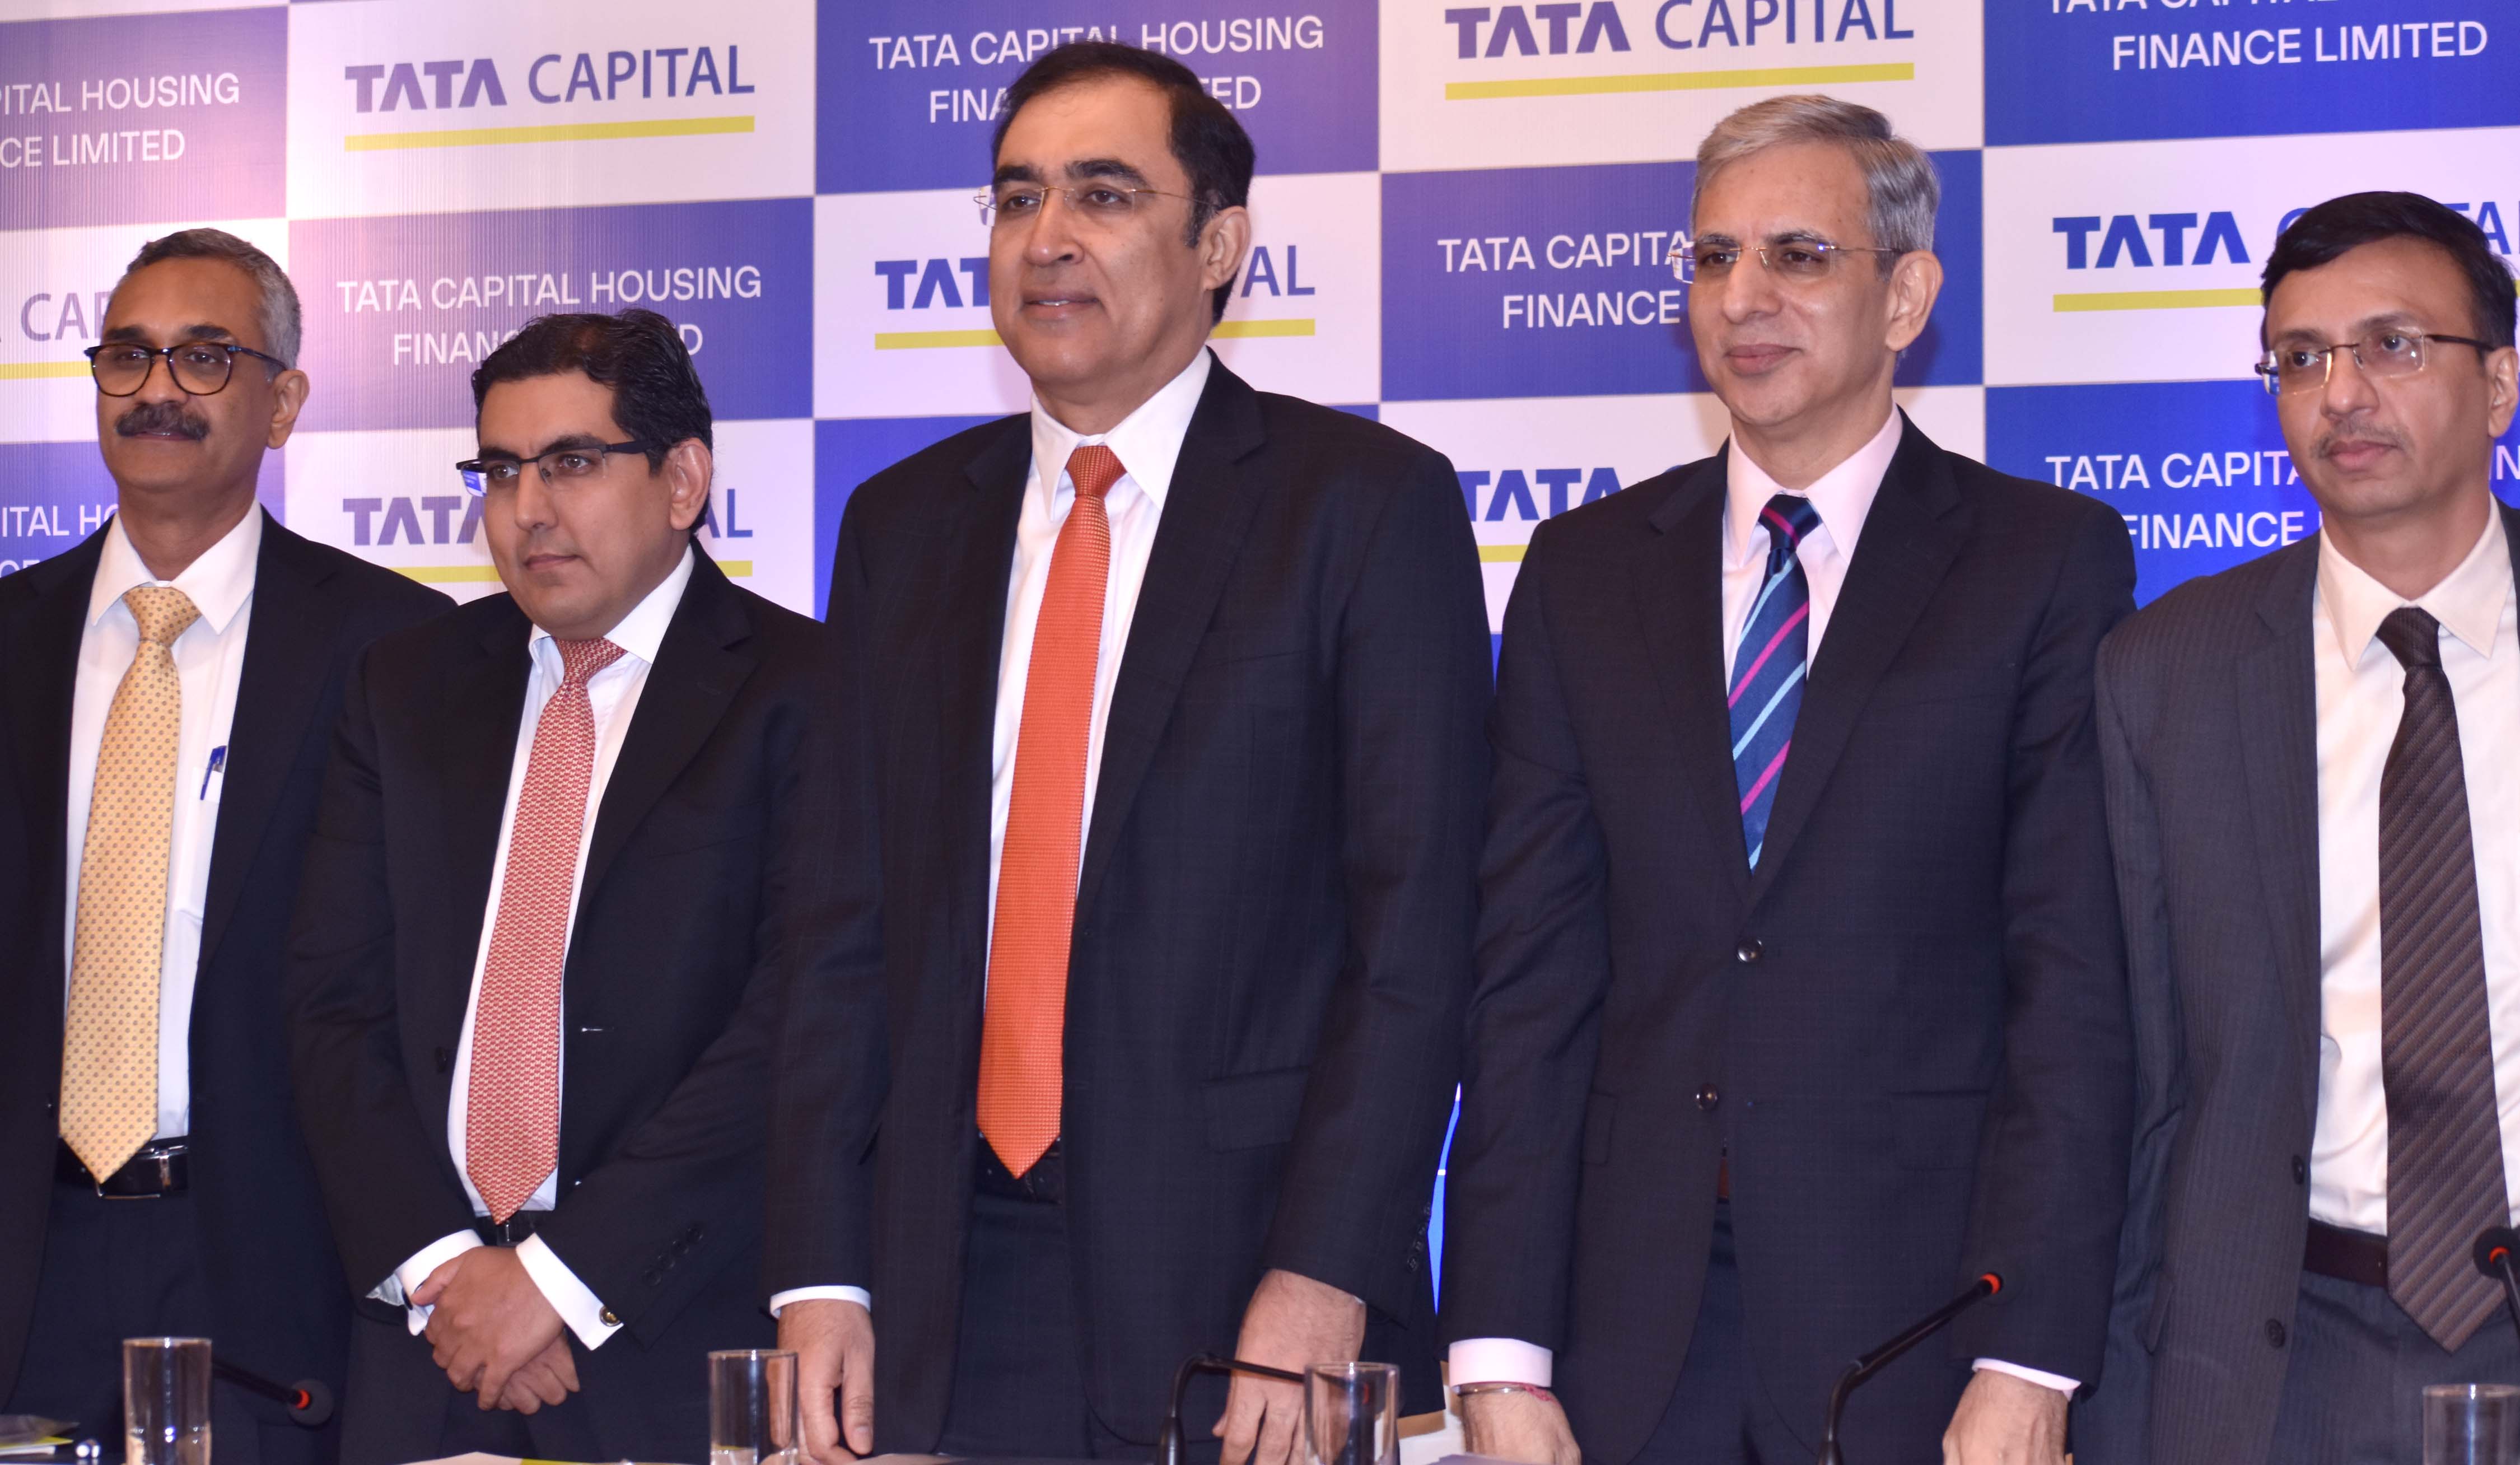 tata capital finance - Online Discount Shop for Electronics, Apparel, Toys,  Books, Games, Computers, Shoes, Jewelry, Watches, Baby Products, Sports &  Outdoors, Office Products, Bed & Bath, Furniture, Tools, Hardware,  Automotive Parts,